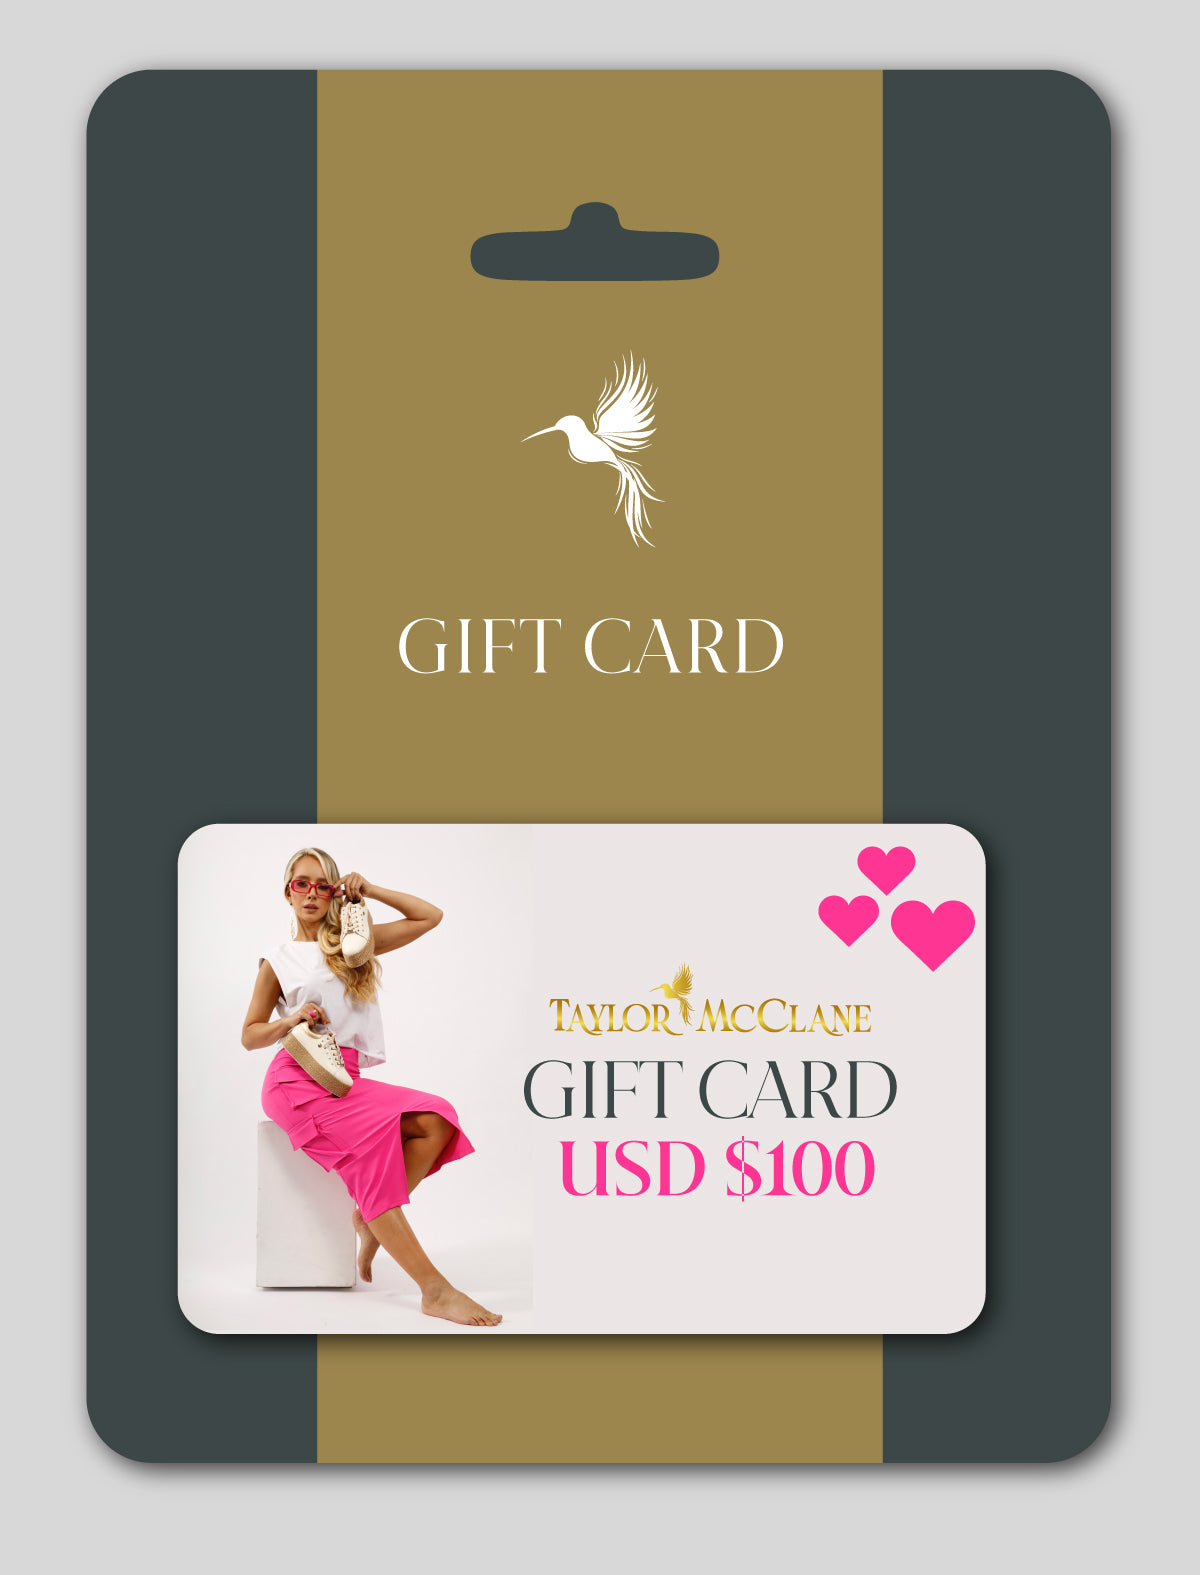 Gift card for $100